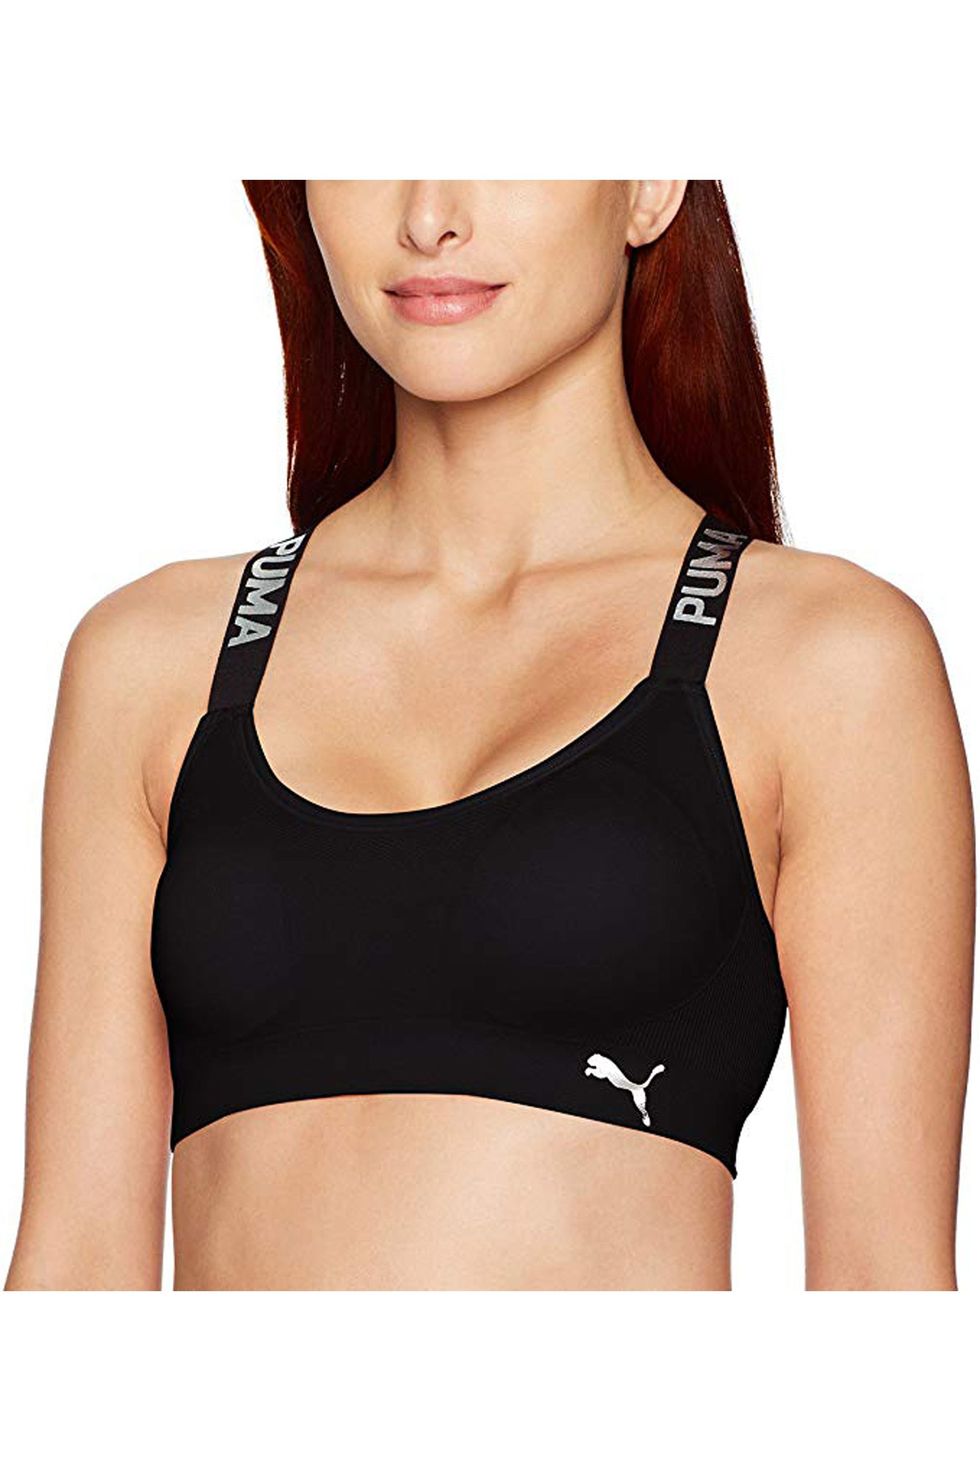 A Lot of Boobs Sports Bra Woman's, Funny, Gift, Breast, Line Art